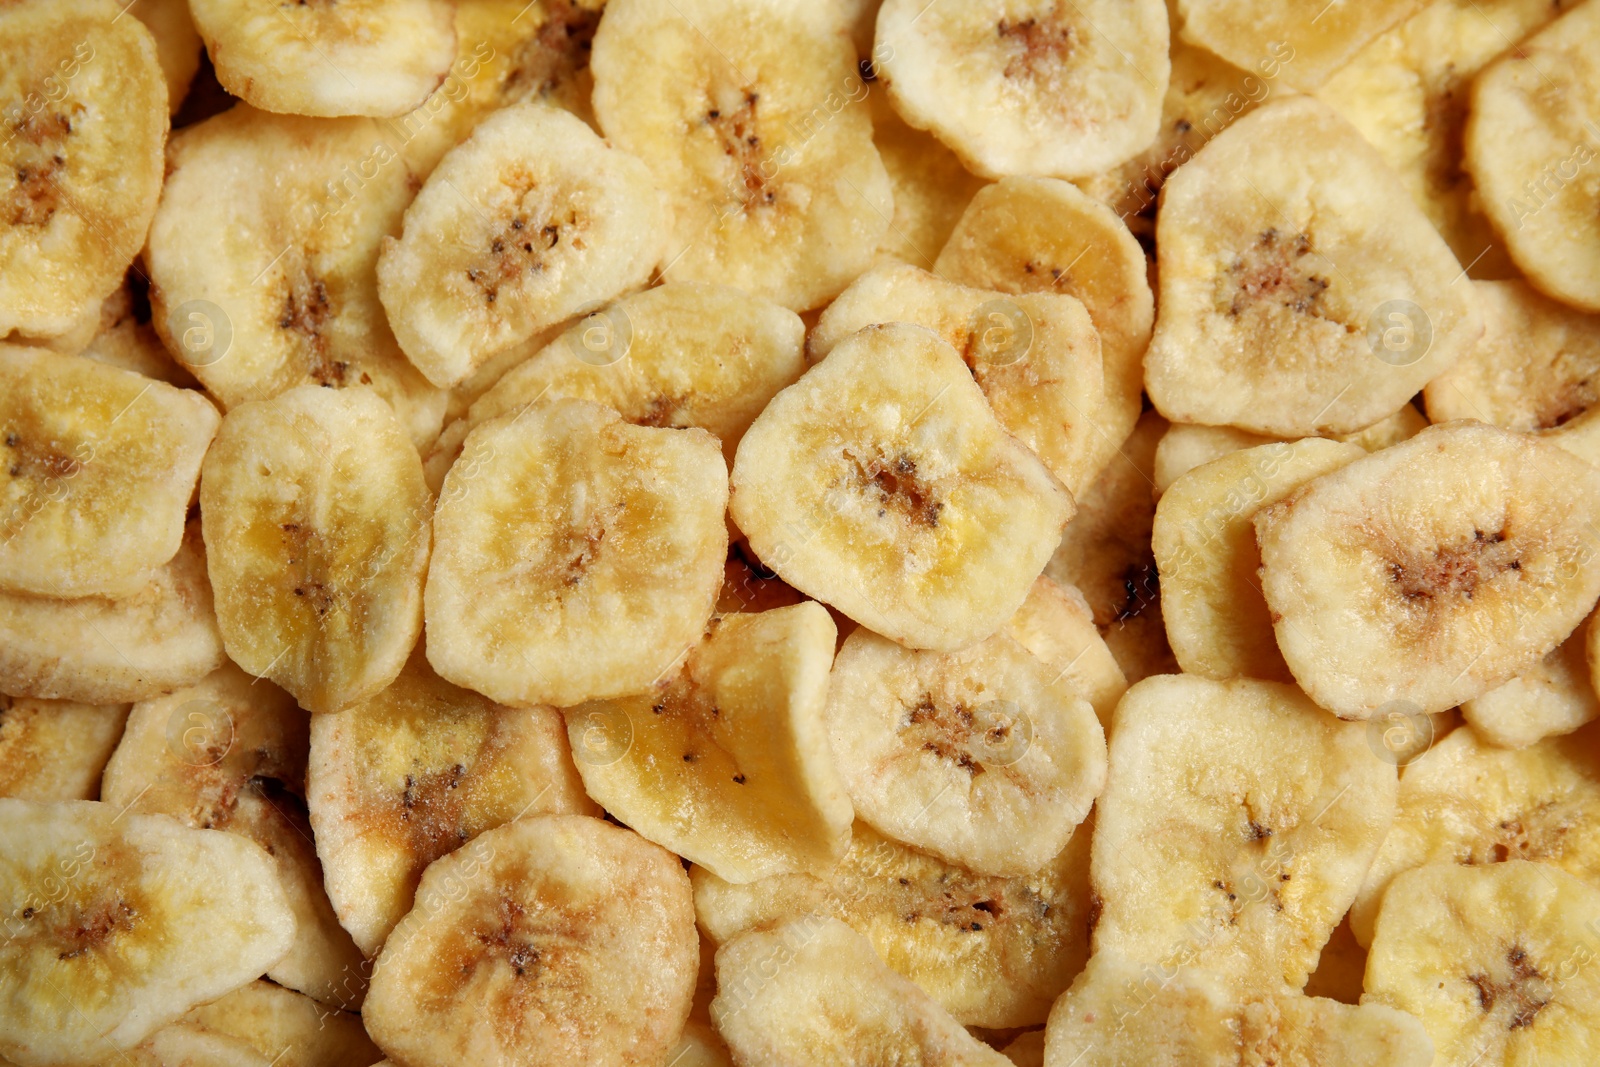 Photo of Sweet banana slices as background, top view. Dried fruit as healthy snack